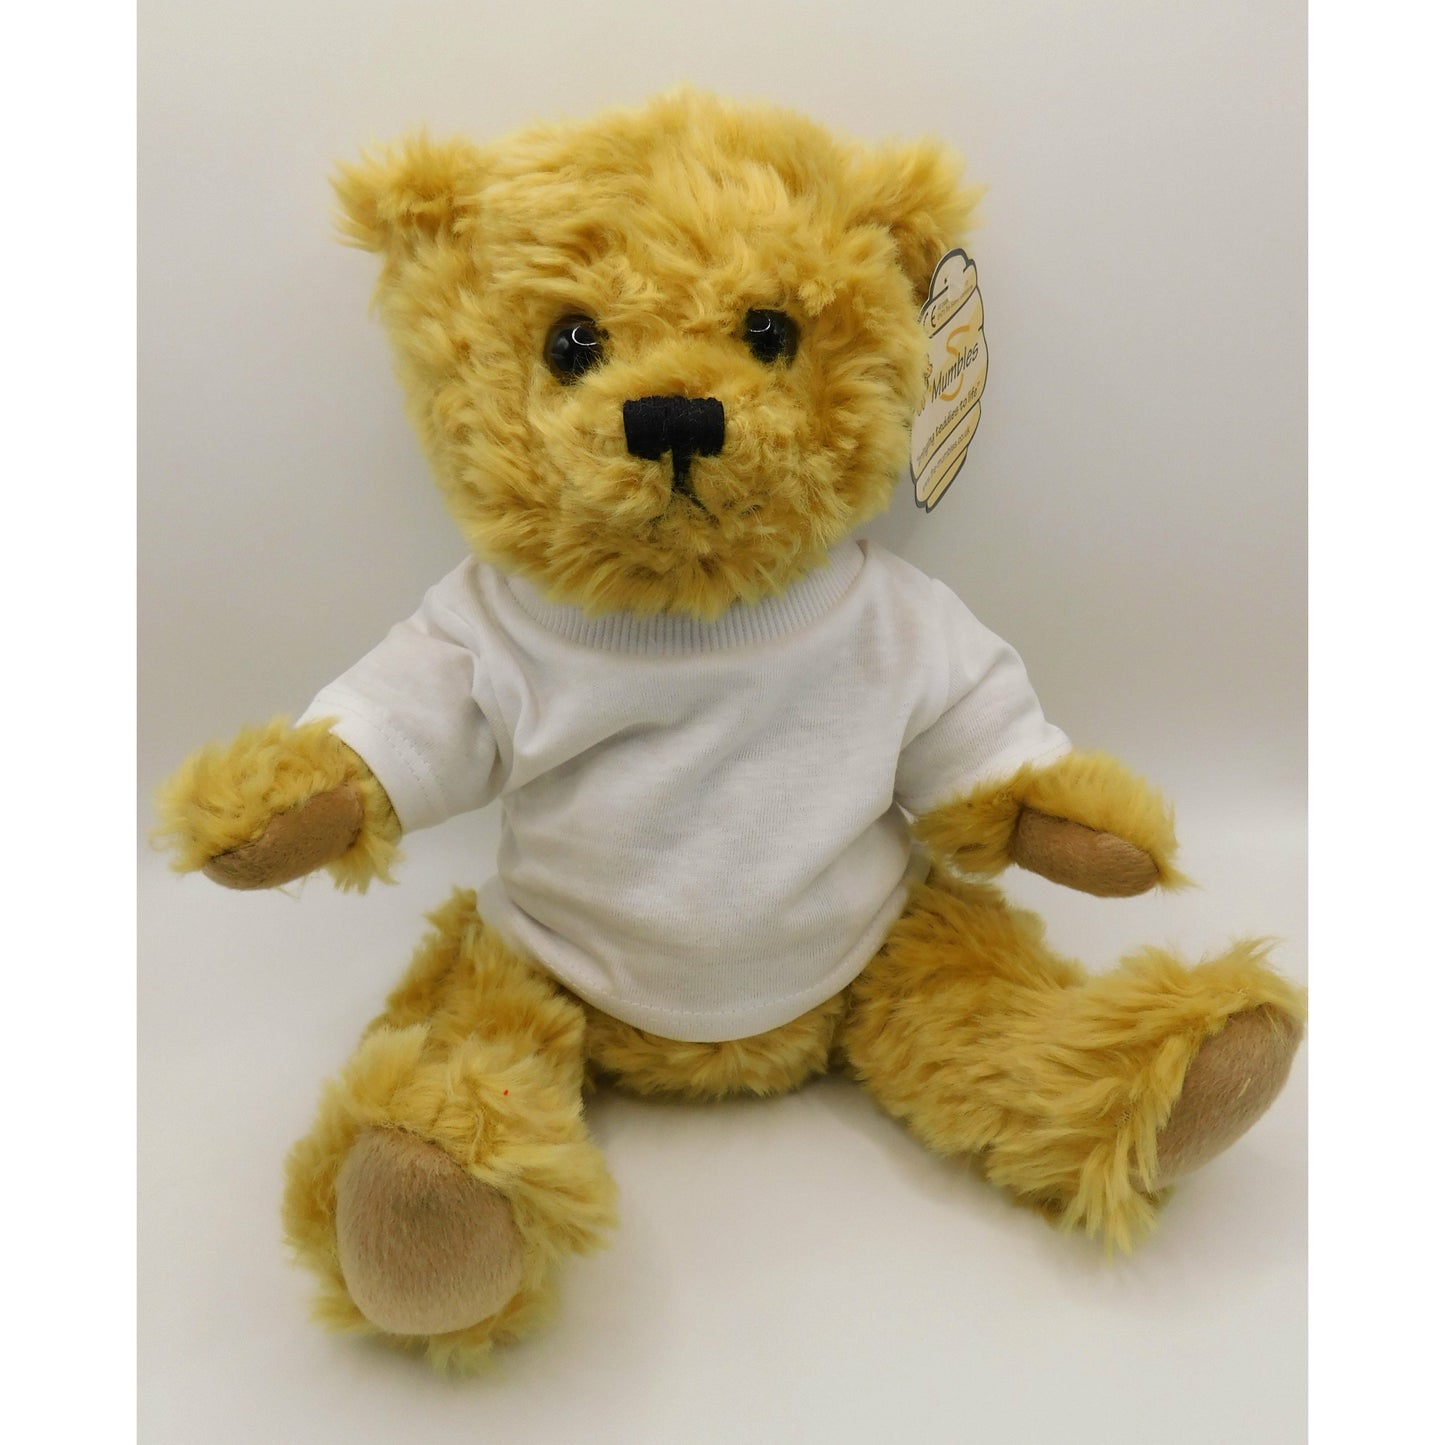 New baby teddy bear / 1st birthday/ Christening gifts/ Welcoming gift